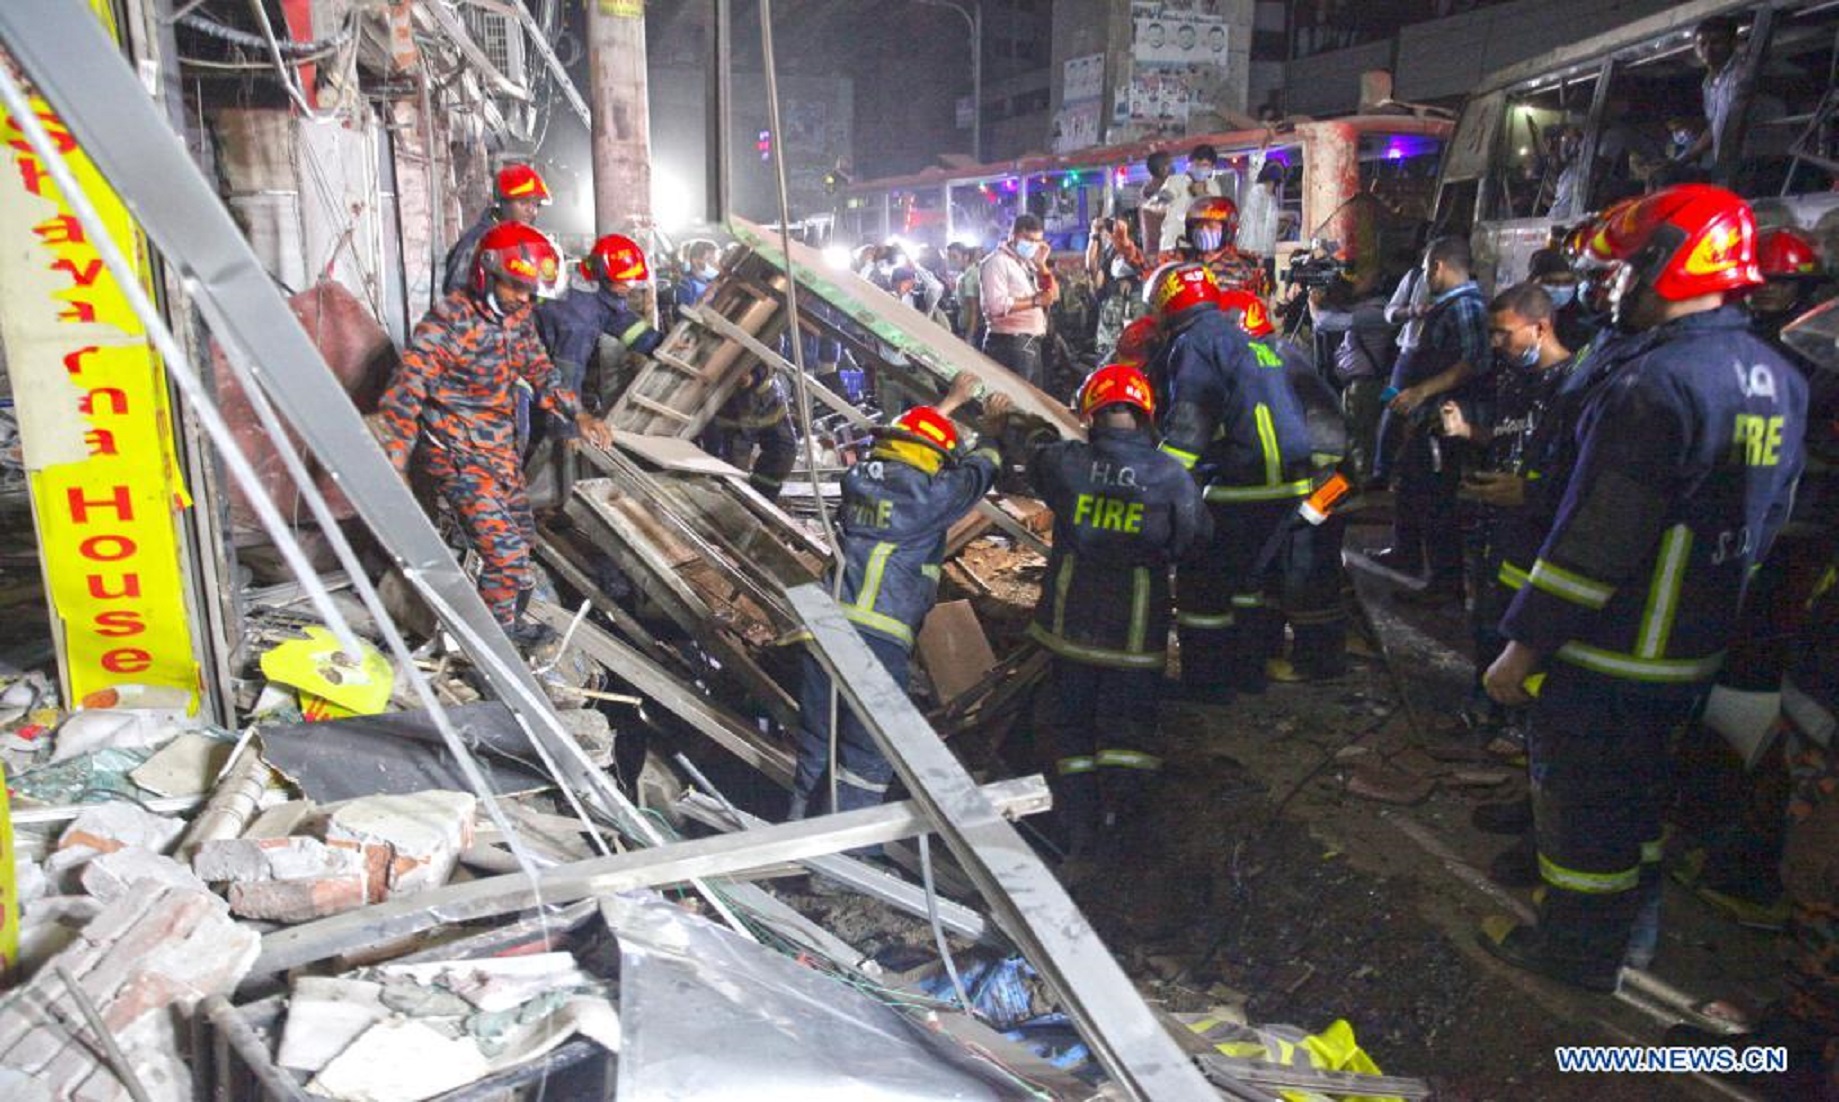 Seven Killed, Dozens Injured In Building Collapse After Explosion In Bangladesh